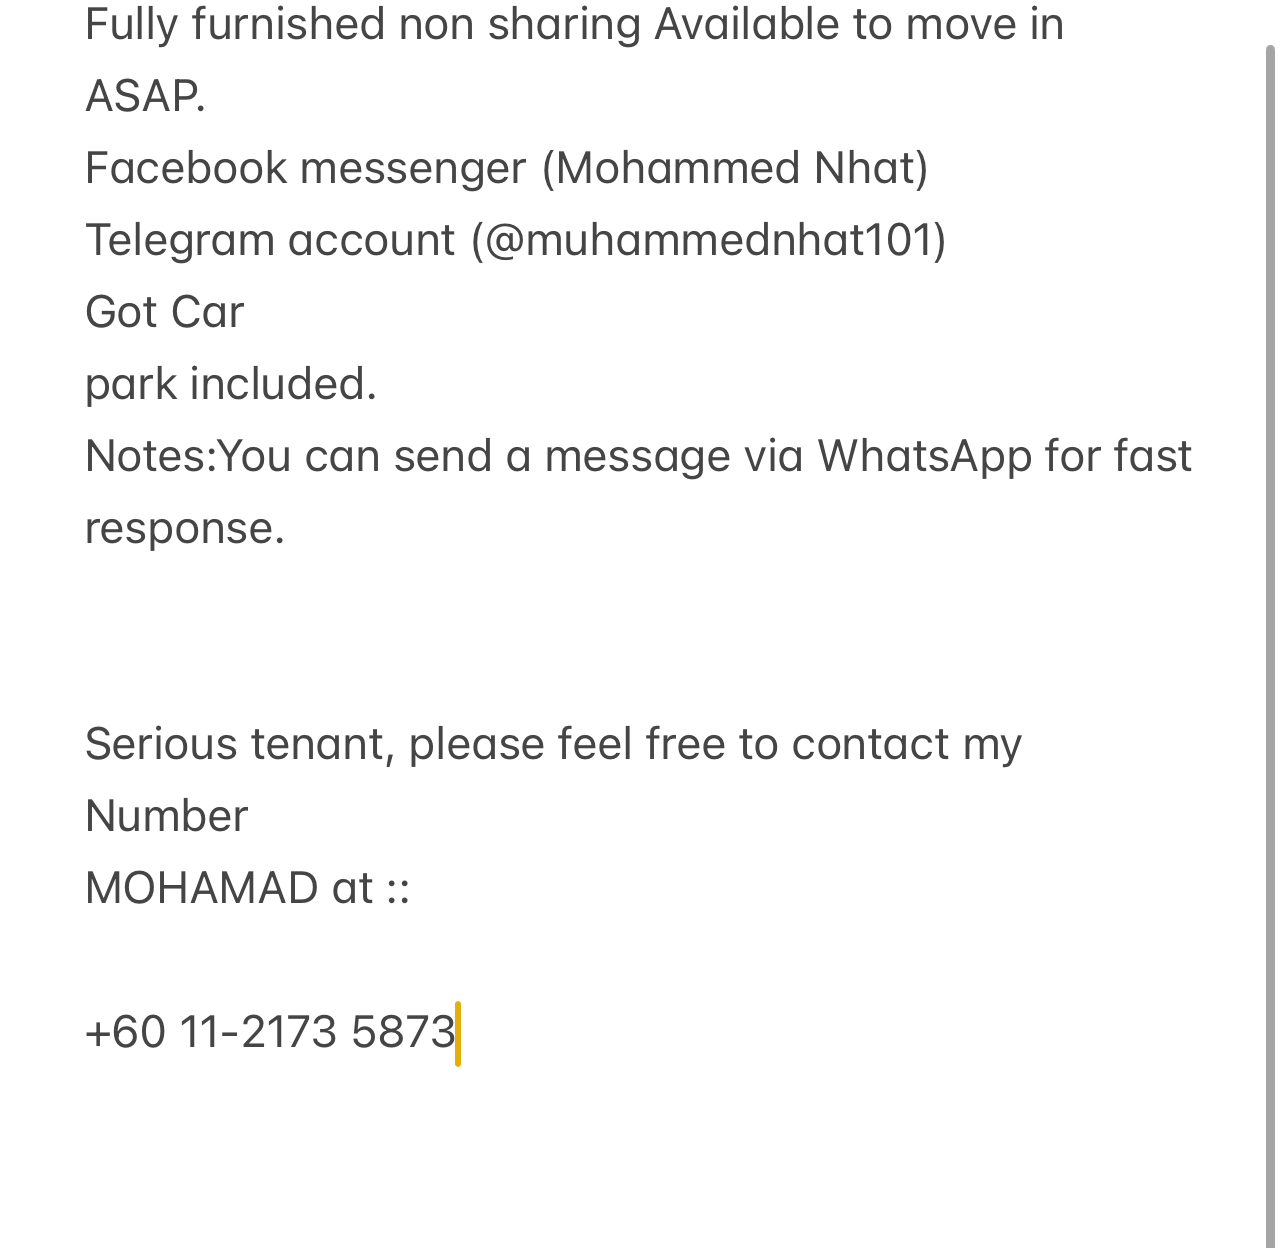 room for rent, master room, baling, Send the owner a message on WhatsApp/facebook if you want to RENT the unit facebook (Mohammed Nhat)&Telegram(@muhammednhat101) Fully furnished non sharing :(comfortable)